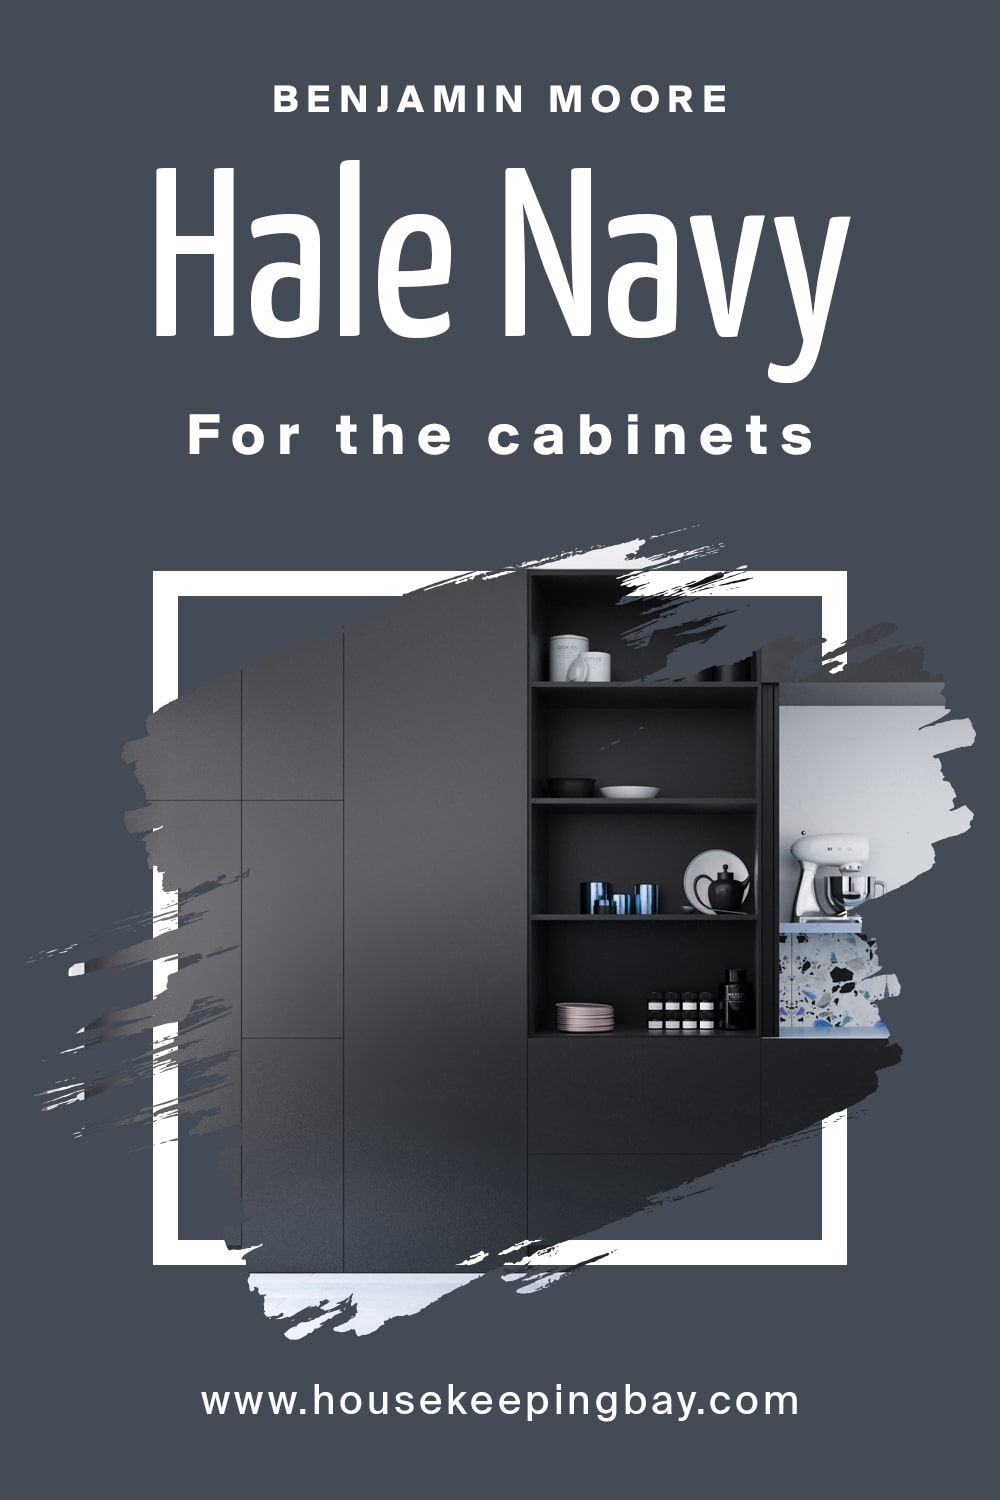 Benjamin Moore. Hale Navy For the cabinets